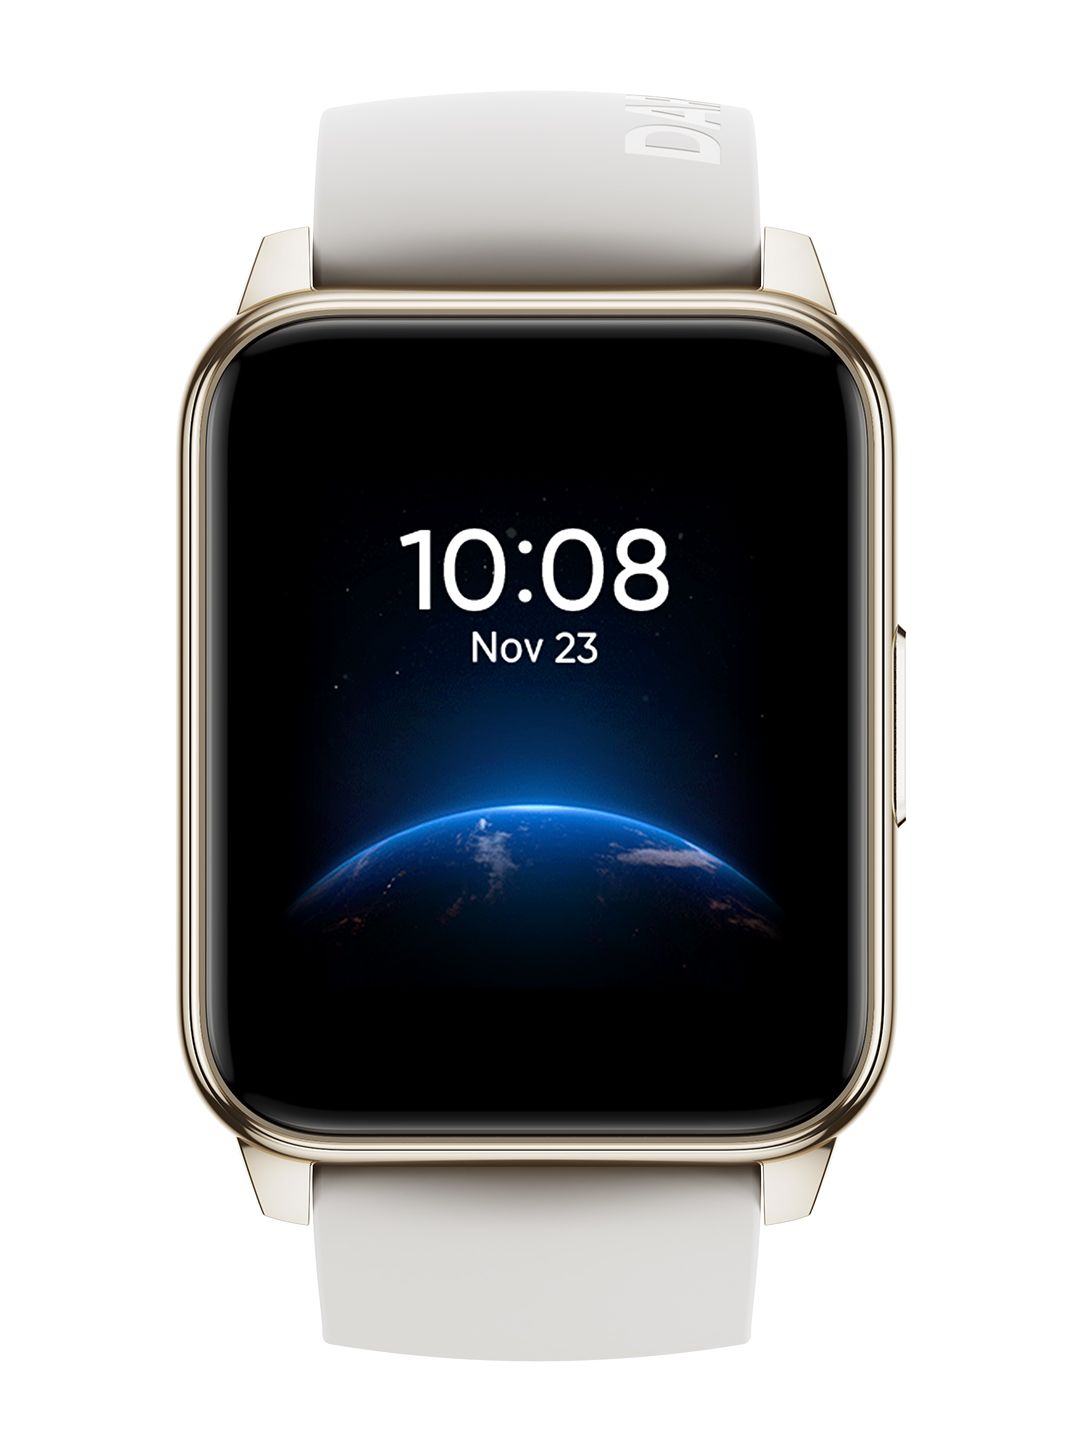 Realme Smart Watch 2 - Gold Price in India